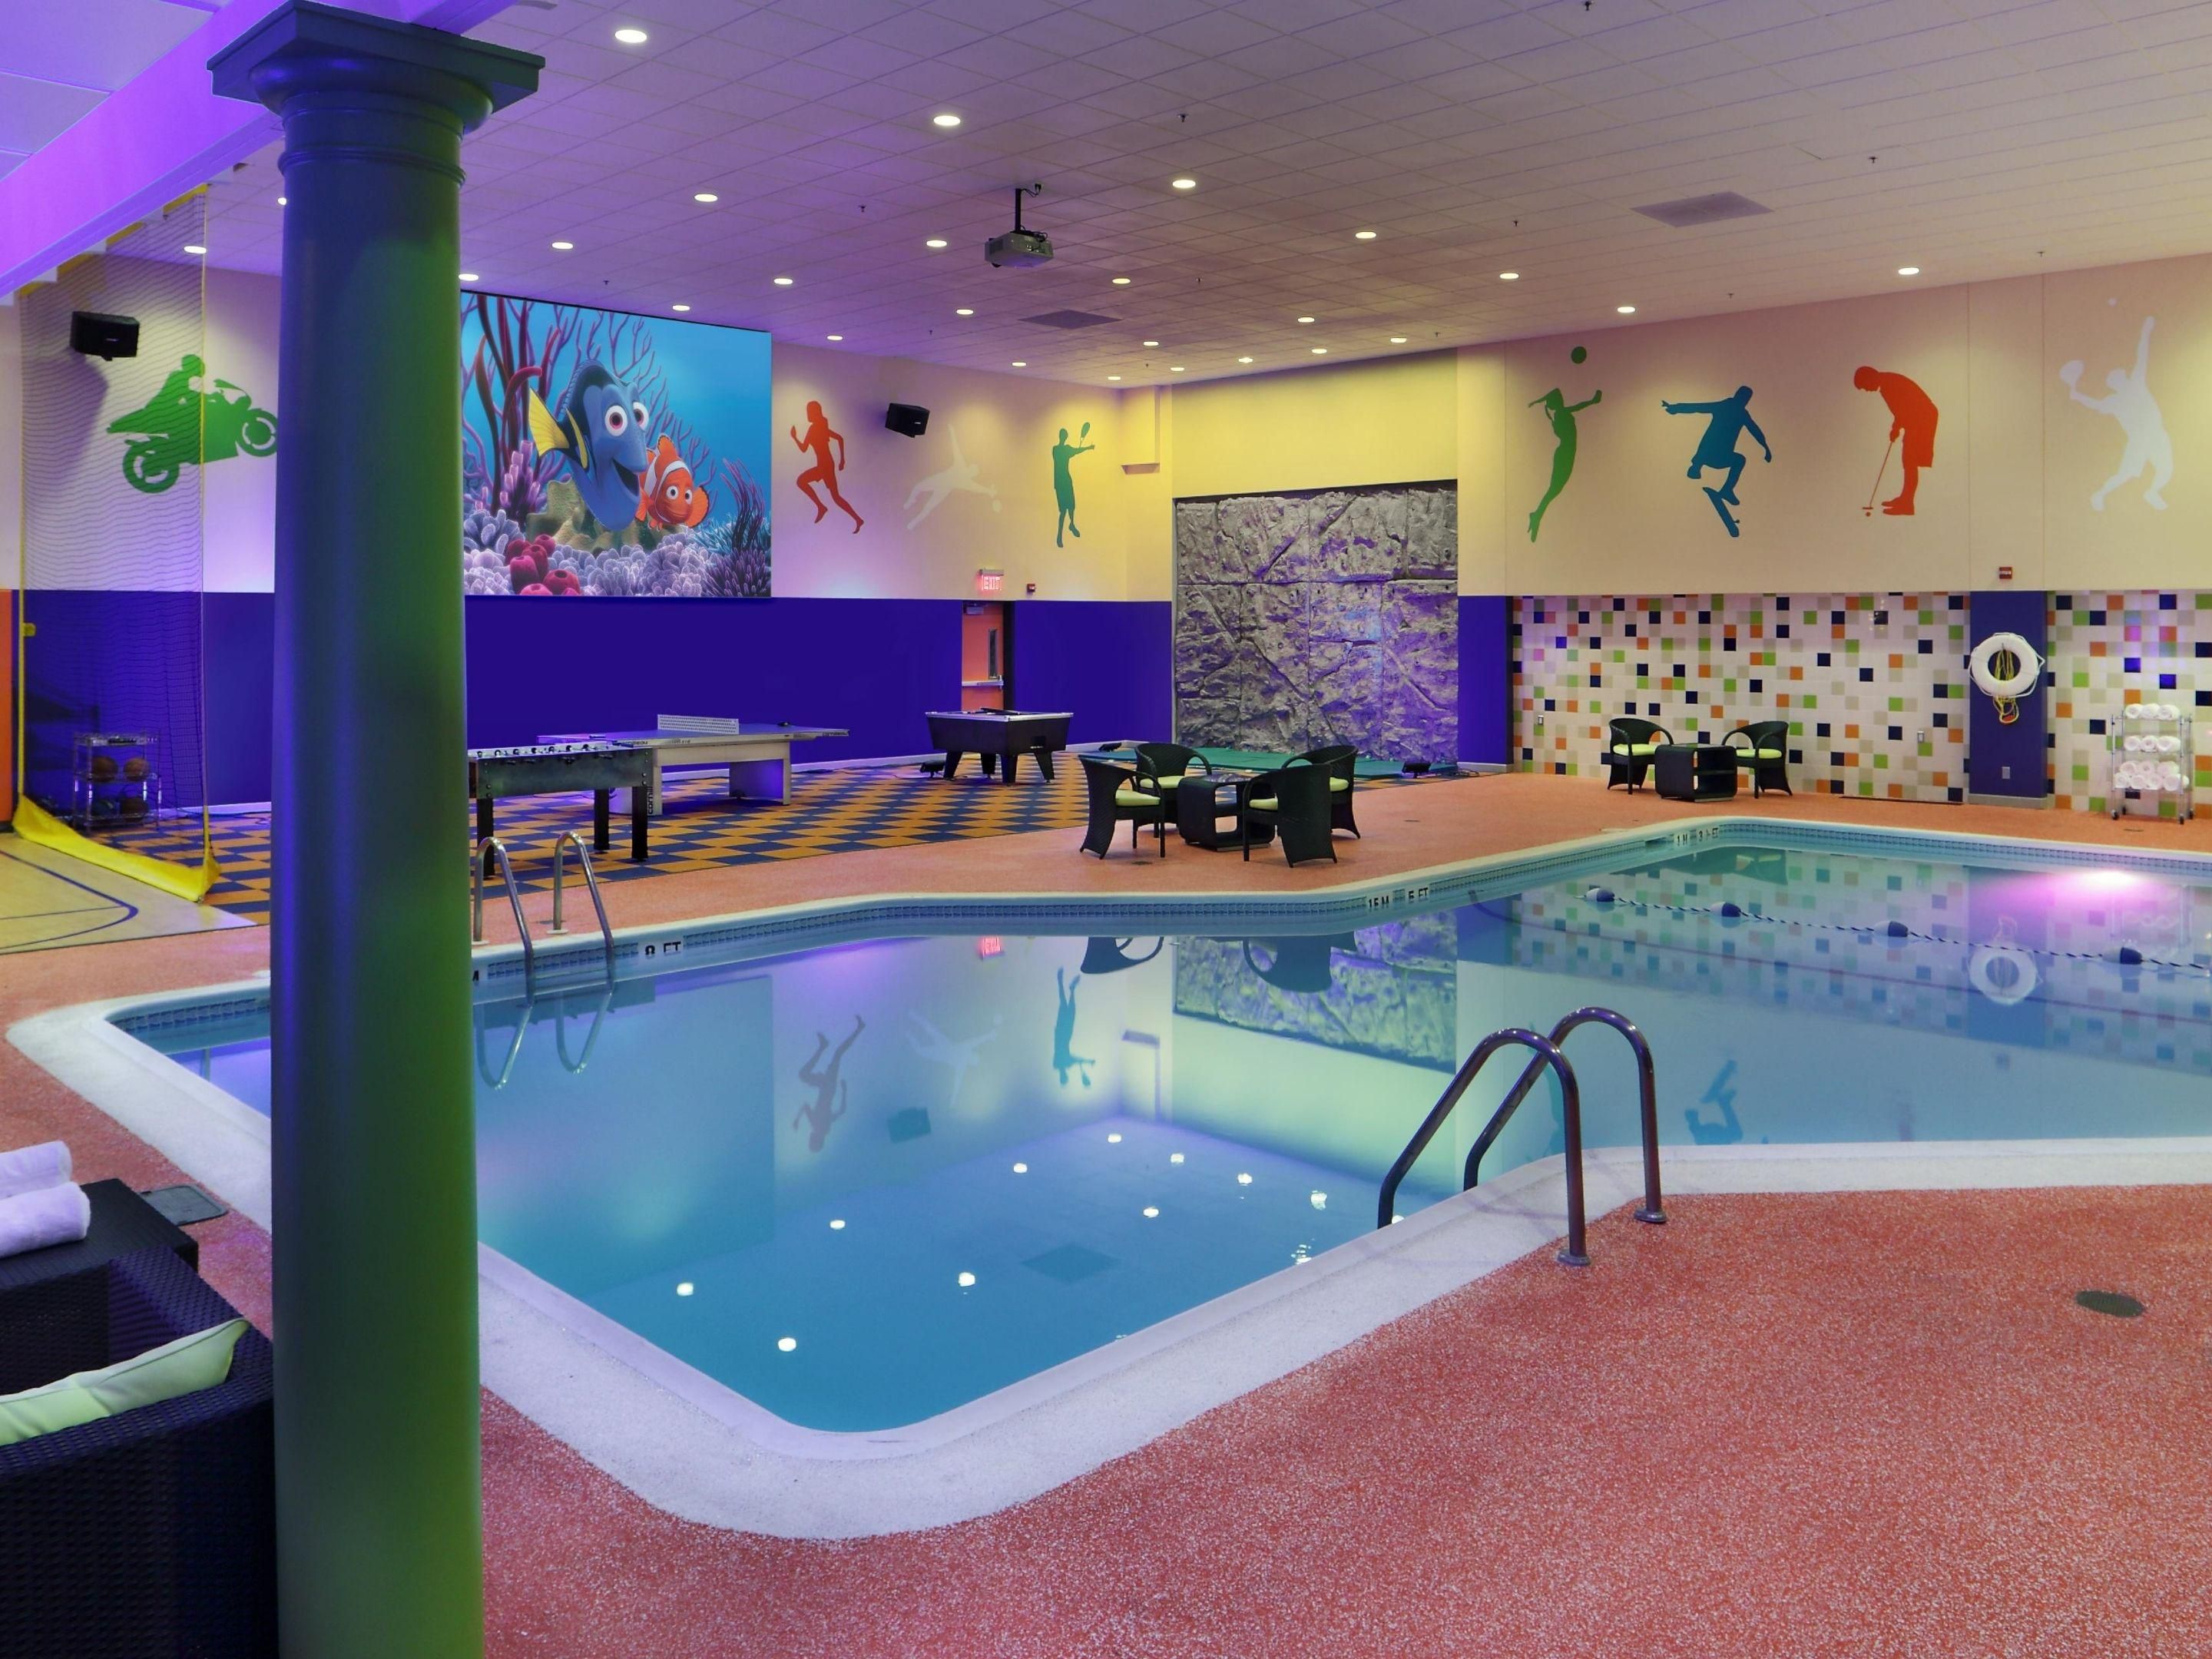 Spend time relaxing or swimming laps in our heated indoor pool. Hang out in a poolside lounger or cabana and enjoy "dive in" movies on the 16-foot screen on Friday and Saturday nights. Play on our Sports Deck, featuring a rock climbing wall, ping pong, bumper pool, and a free-throw basketball court, perfect for unwinding or playing with the kids.
